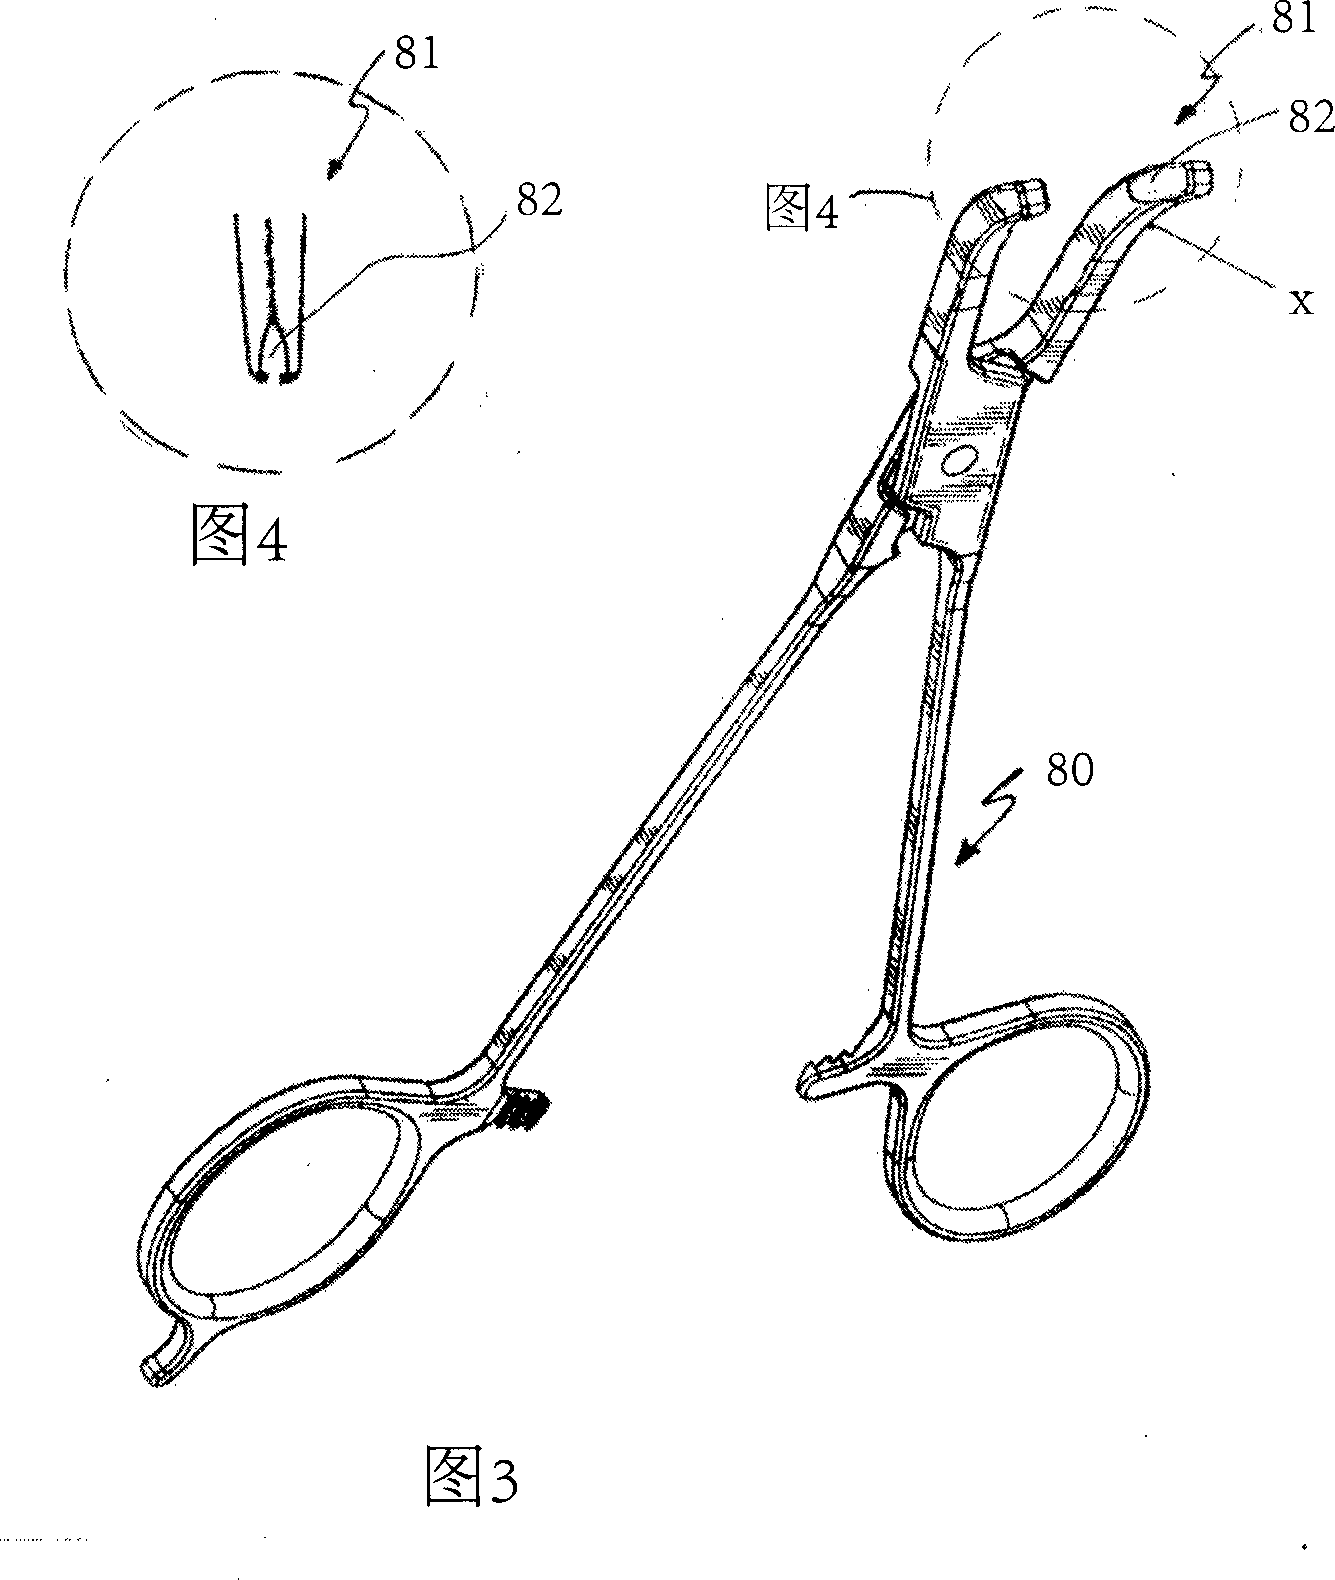 Prosthesis mounting device and carrier tool for use in mini implant fixed/removable prosthodontic applications